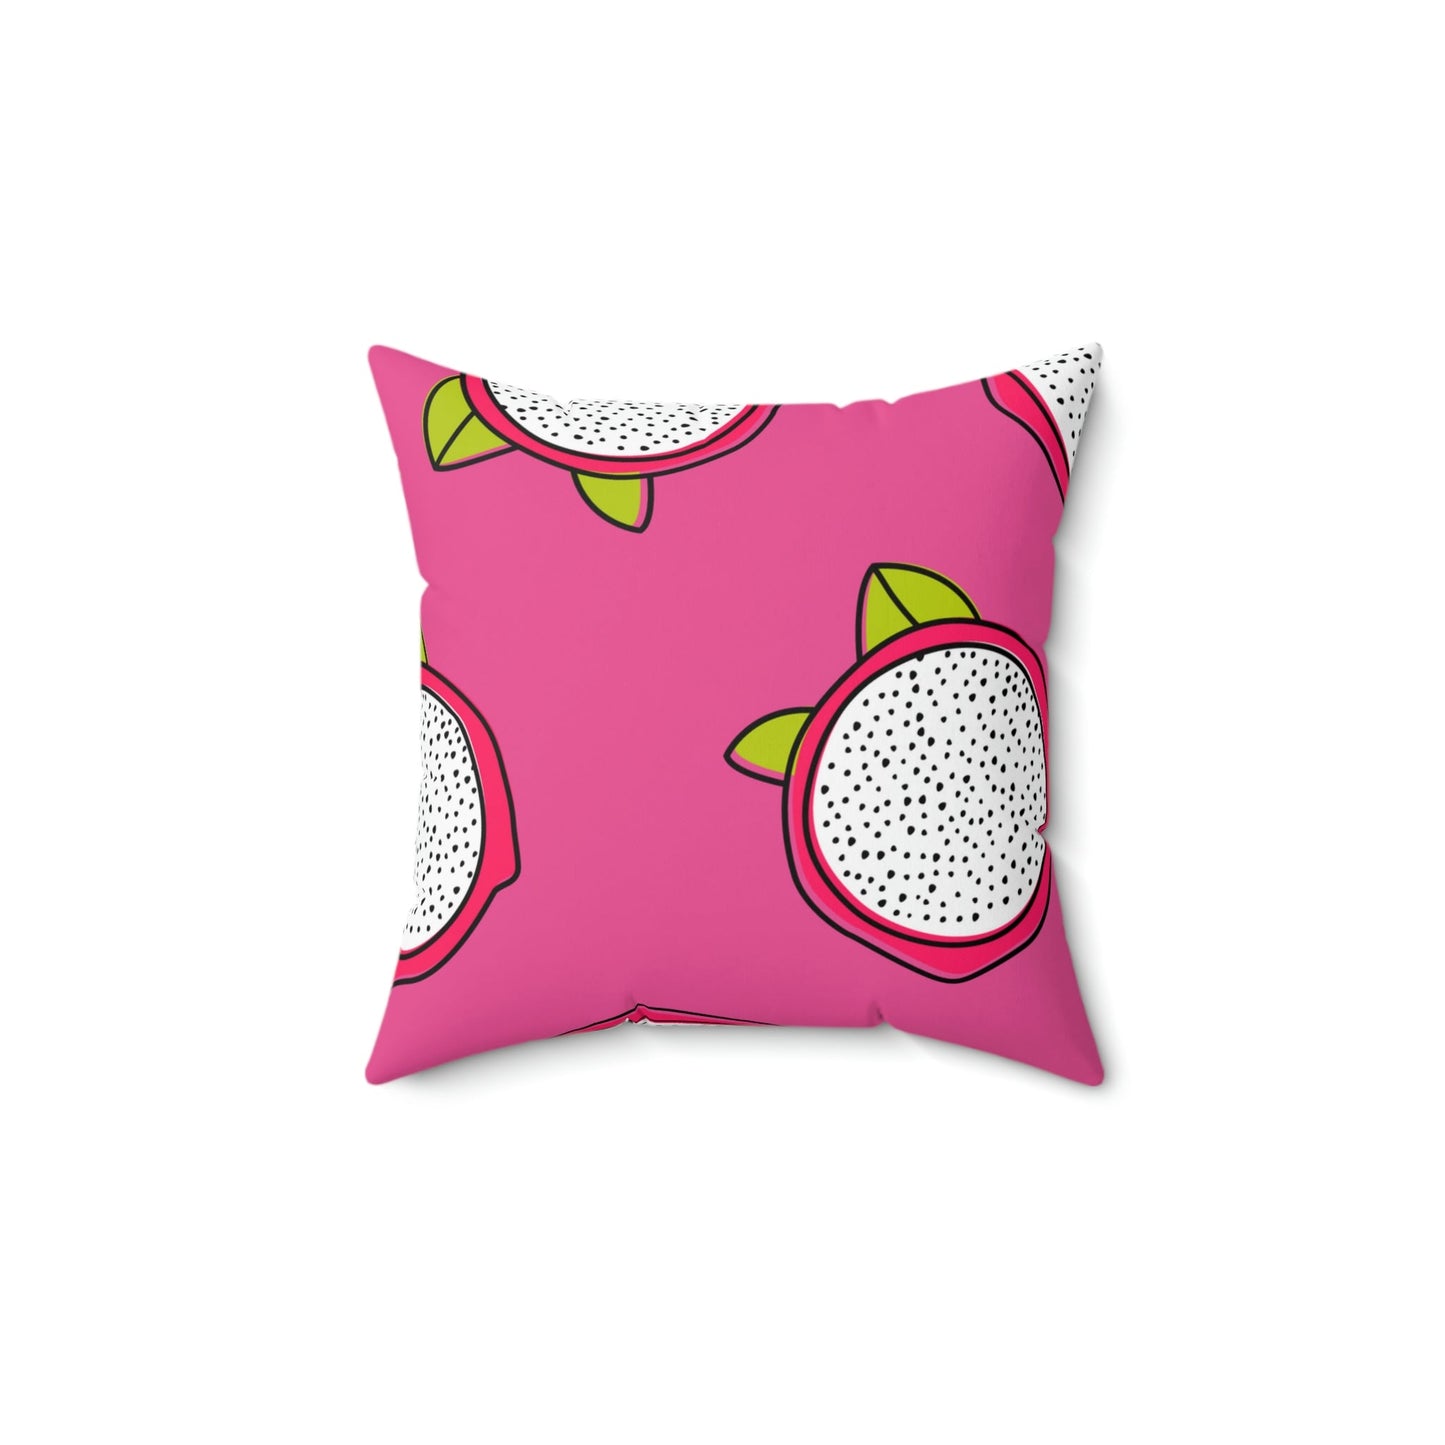 Pretty Pink Dragonfruit Square Pillow Home Decor Pink Sweetheart